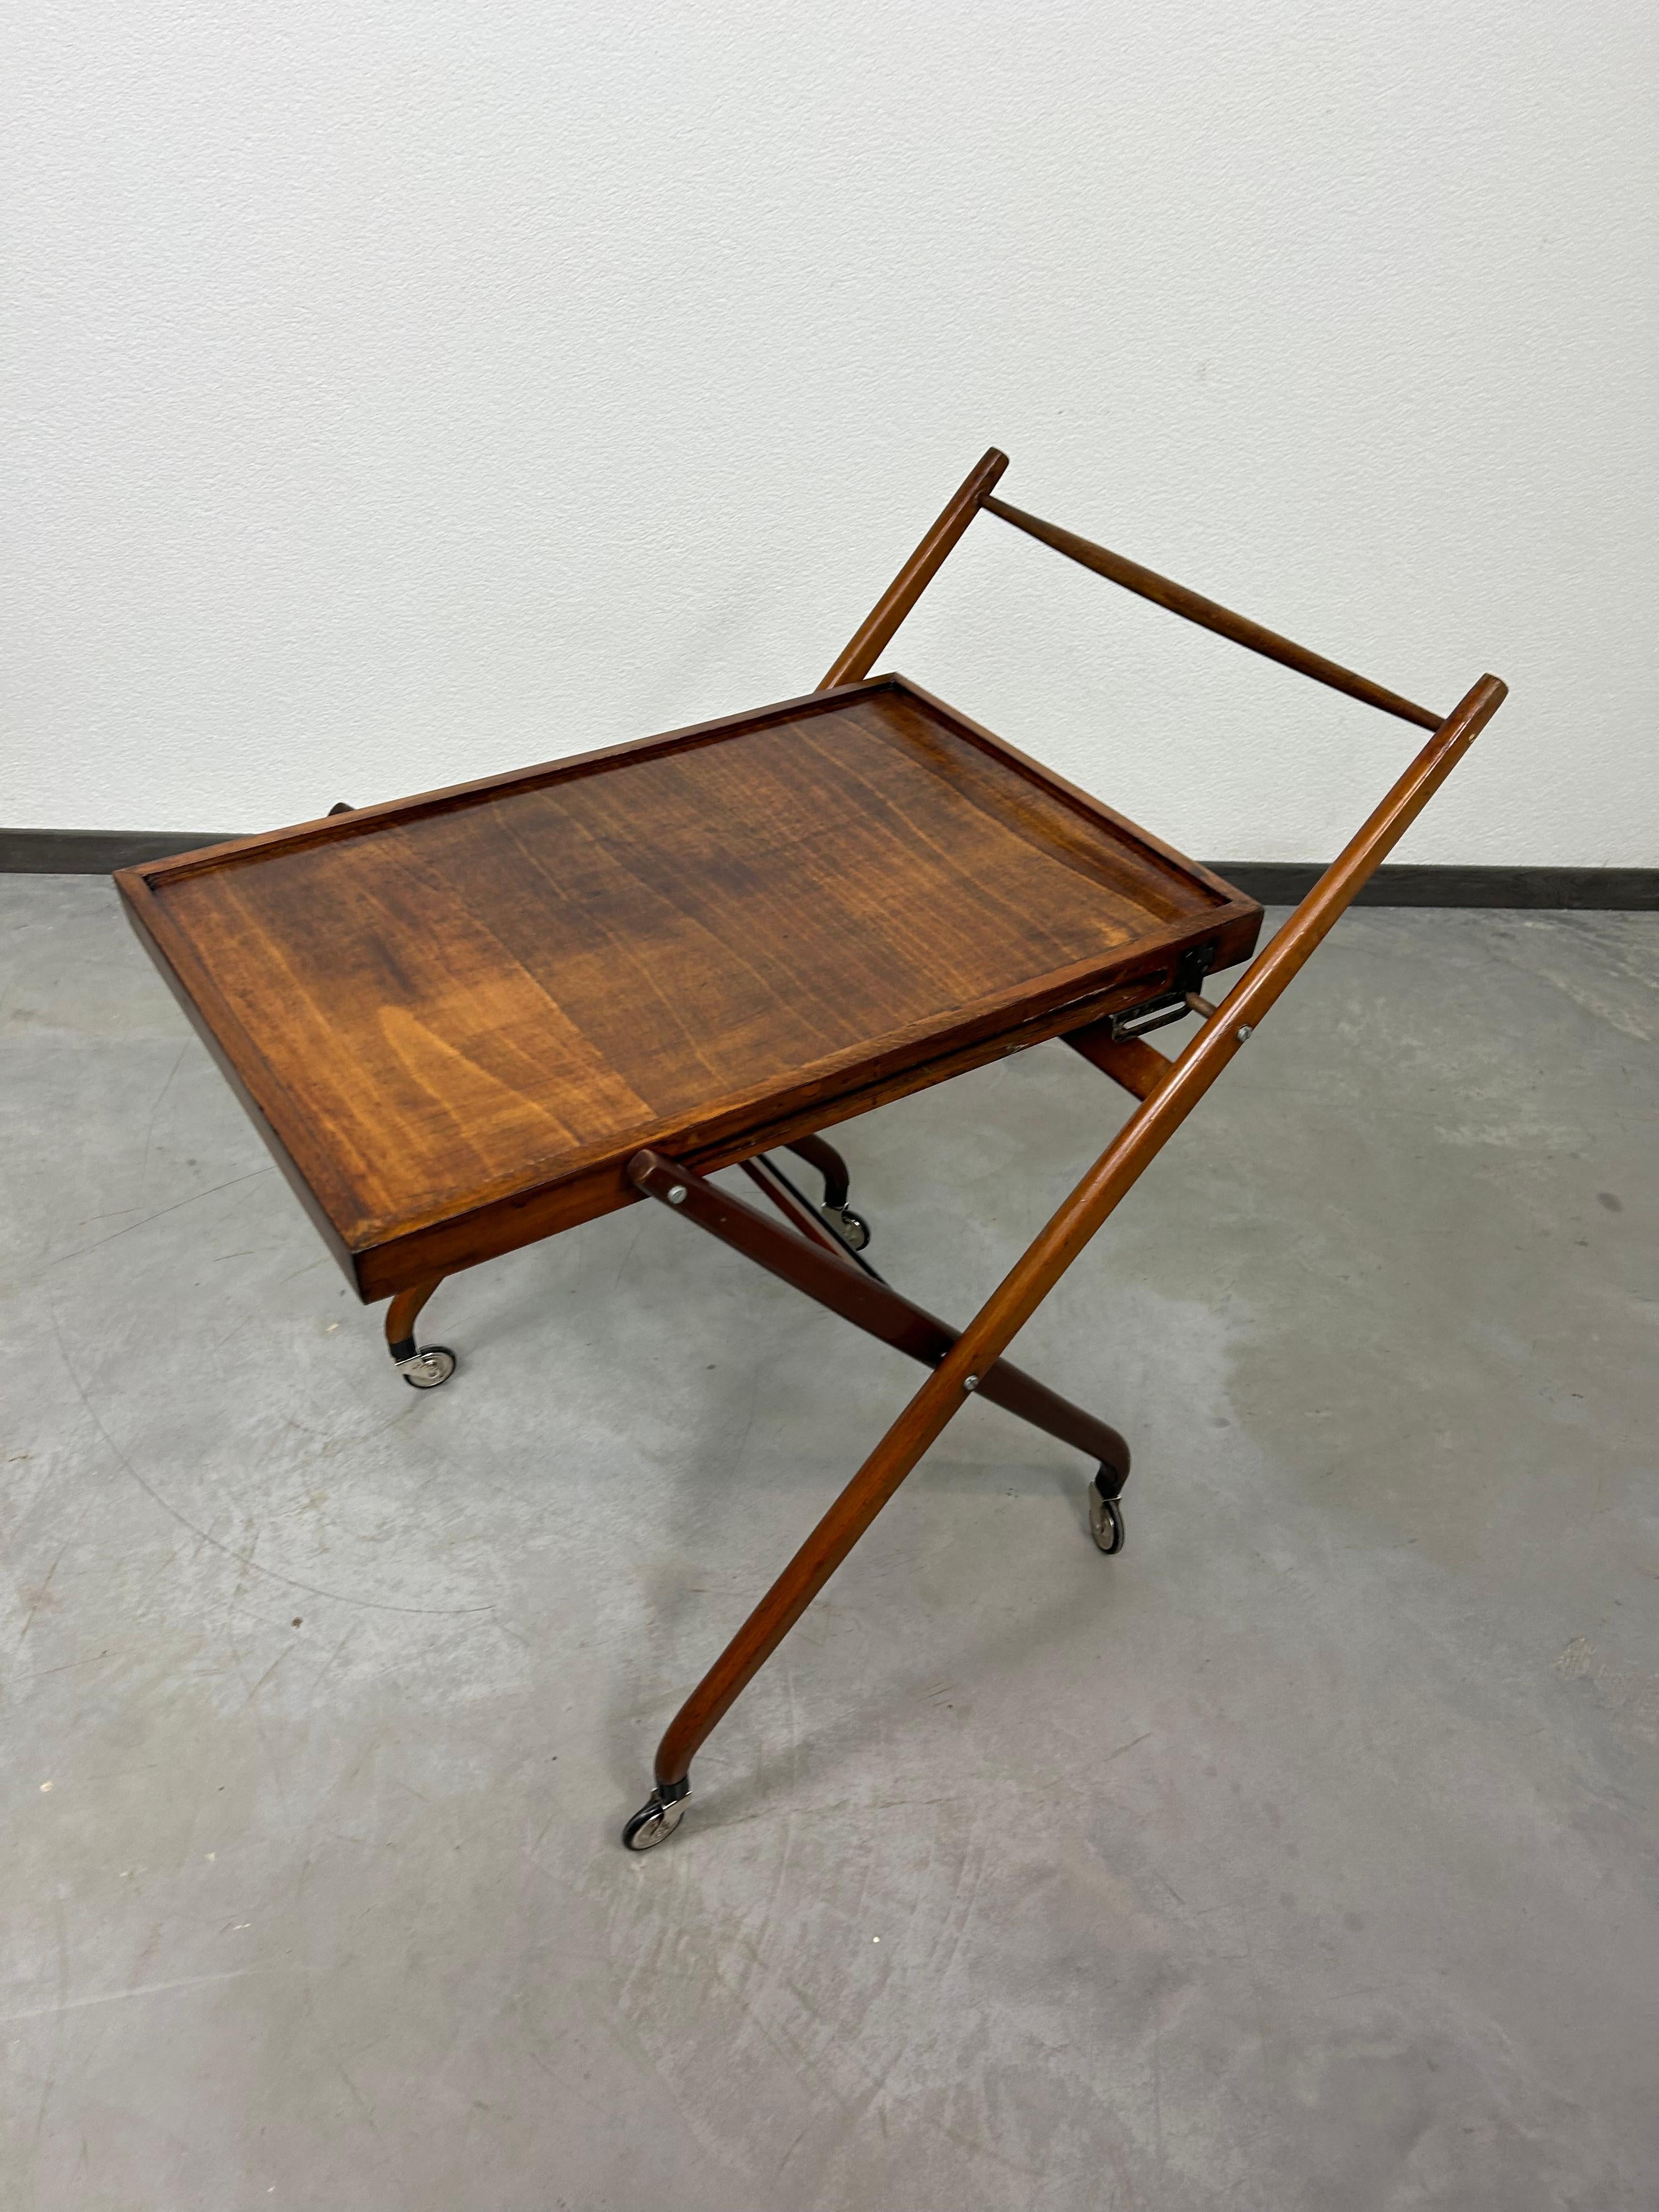 Midcentury design serving trolley by Thonet Mundus in very nice original condition.